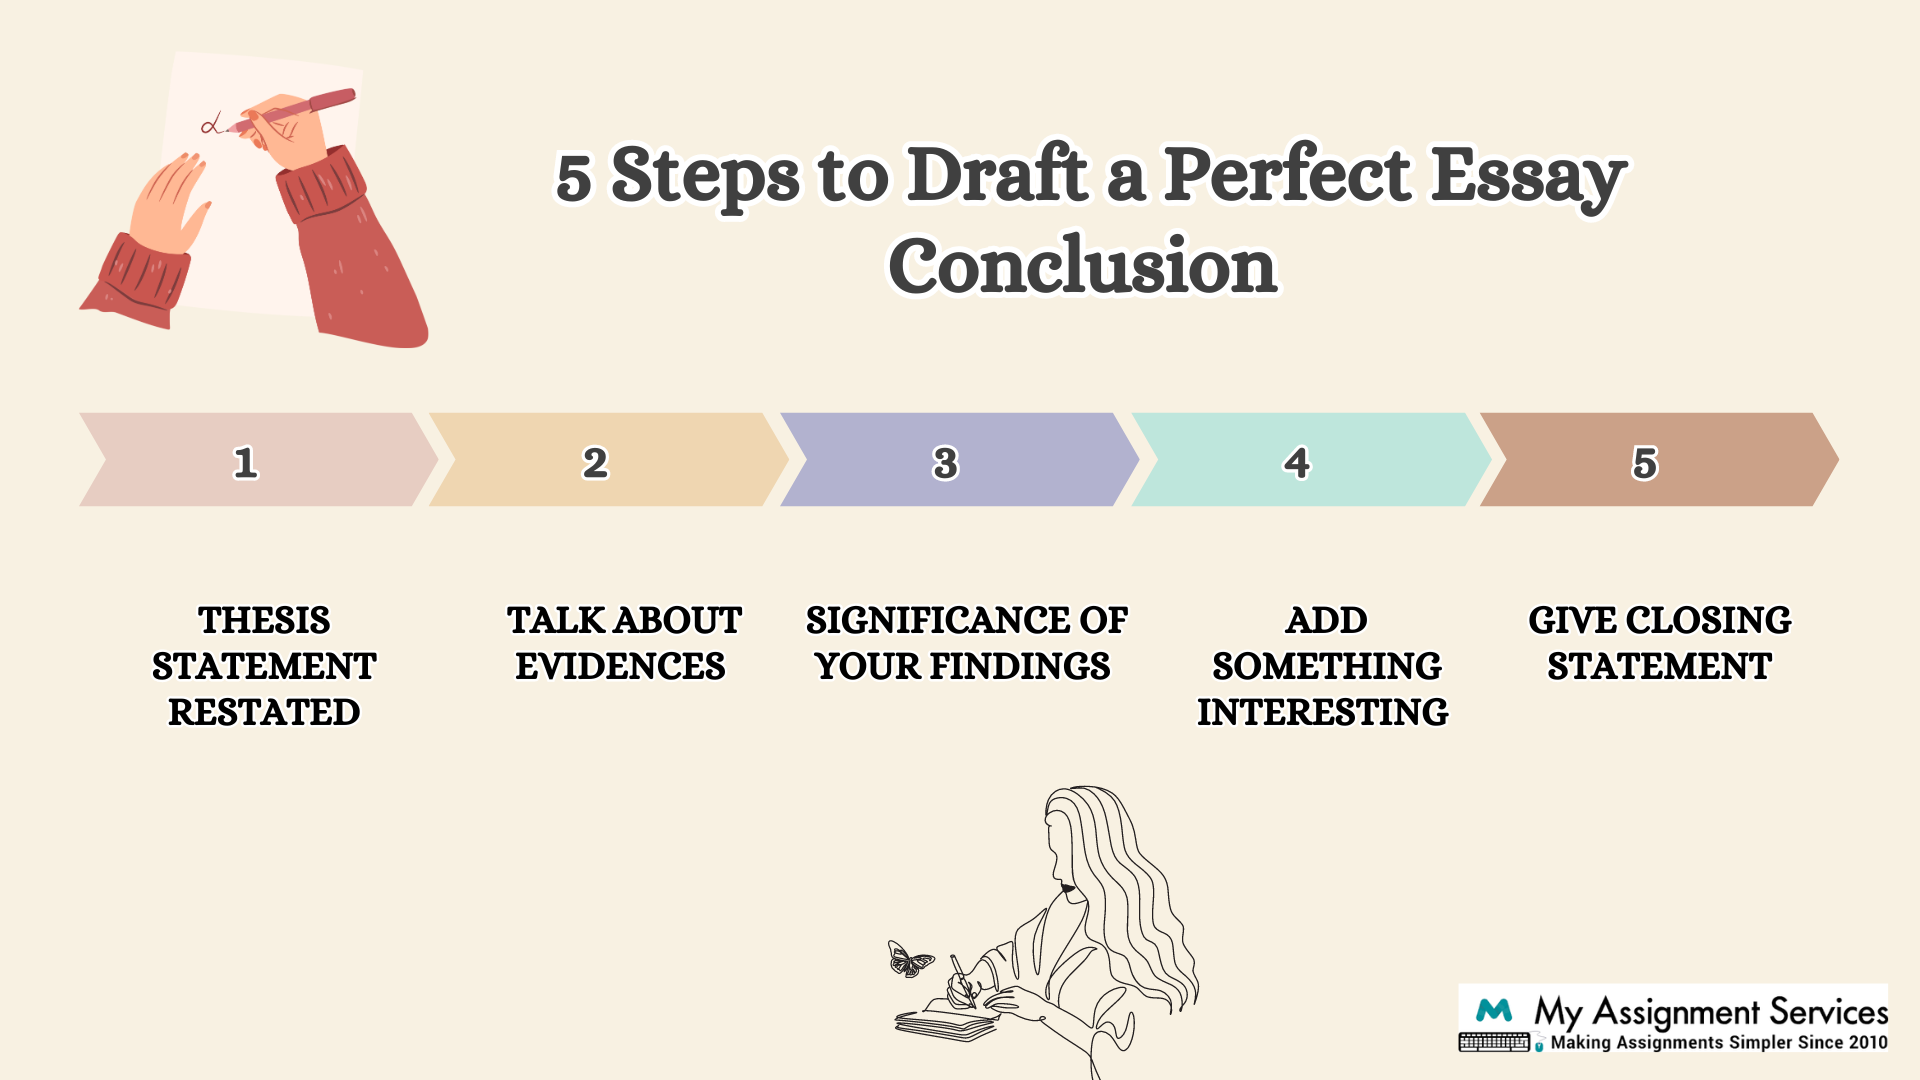 5 Steps to Draft a Perfect Essay Conclusion